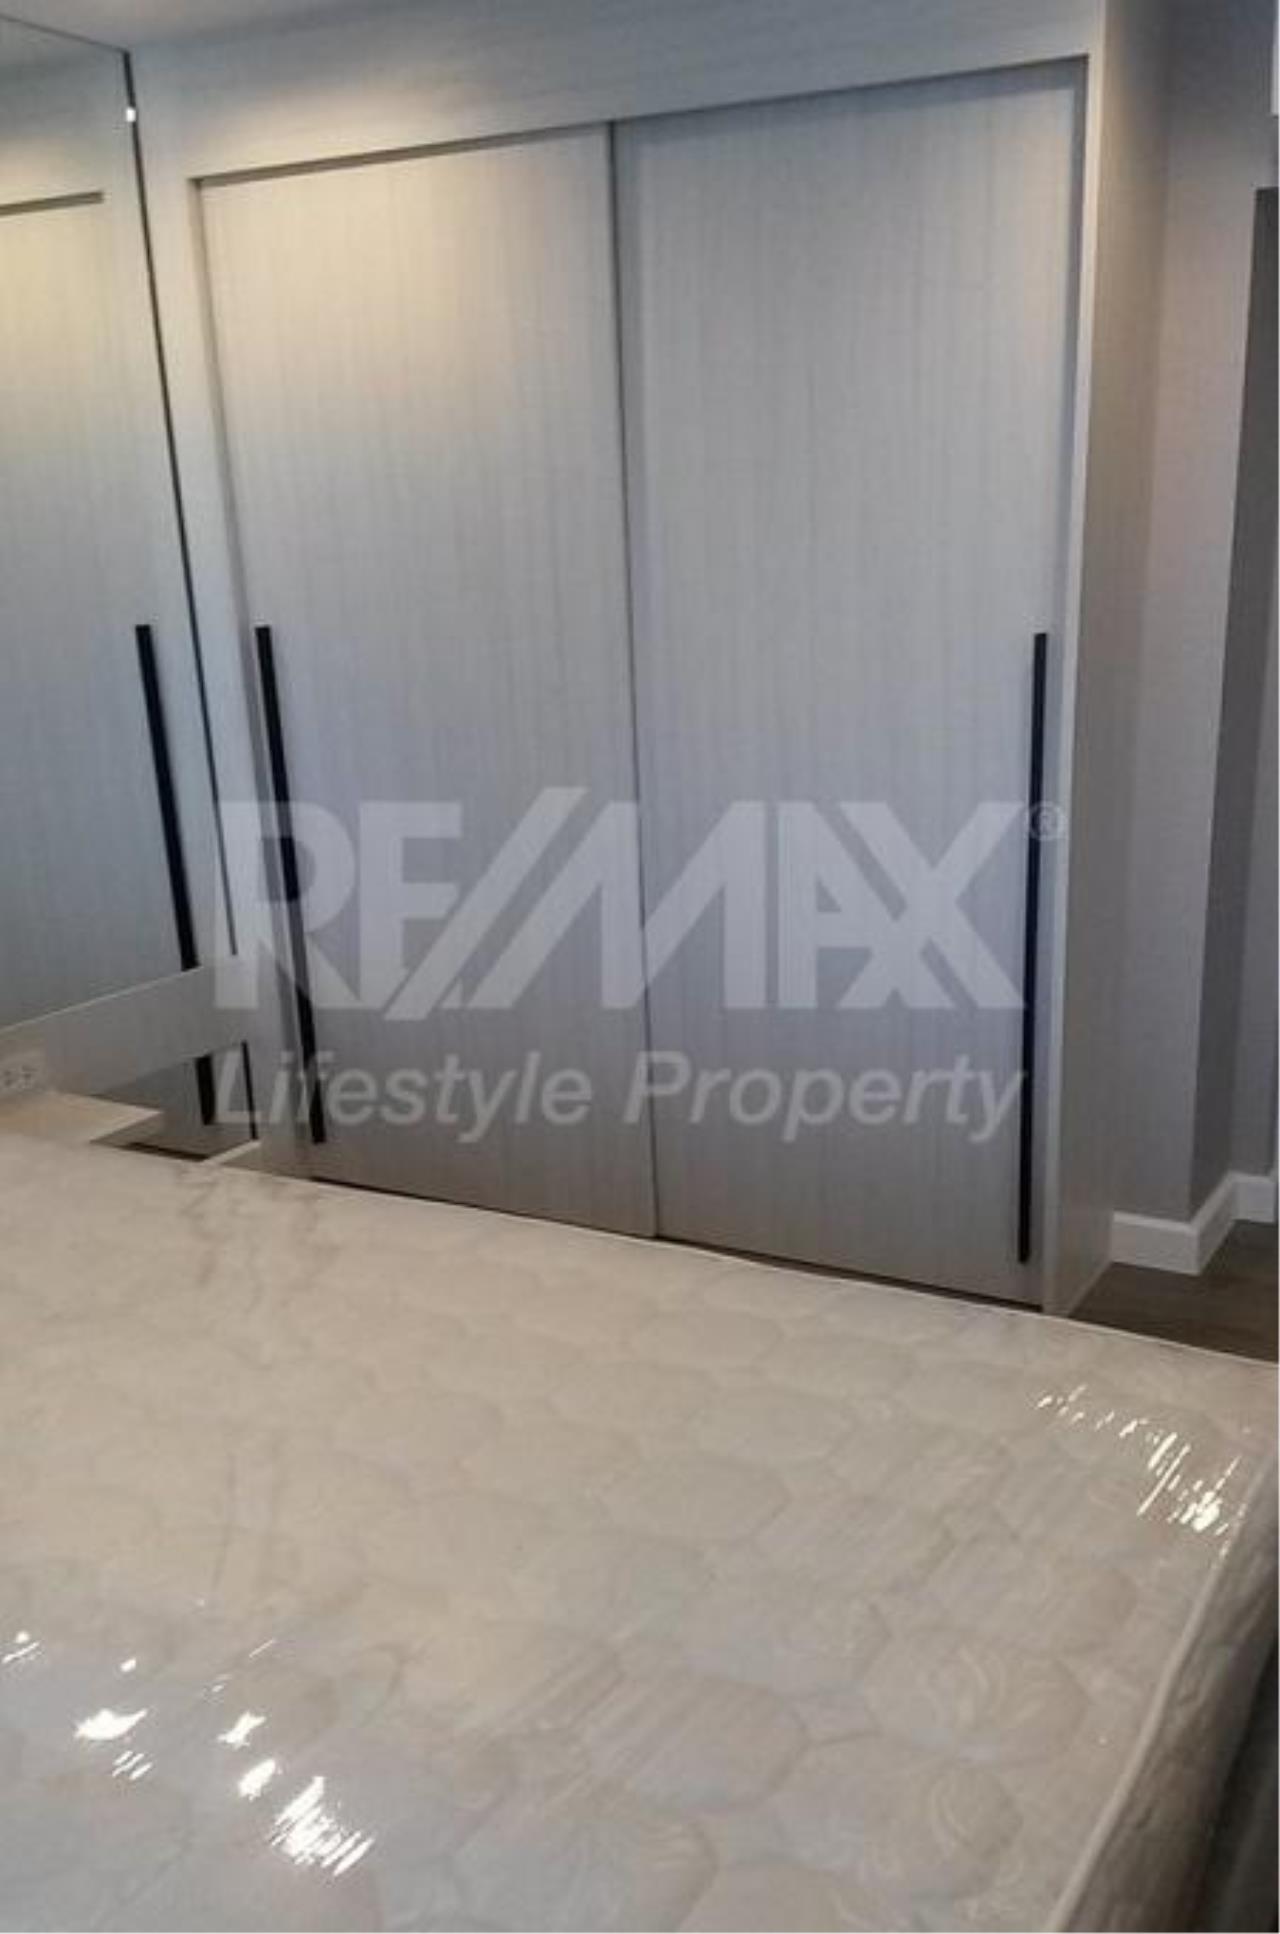 RE/MAX LifeStyle Property Agency's The Room Sukhumvit 40 3